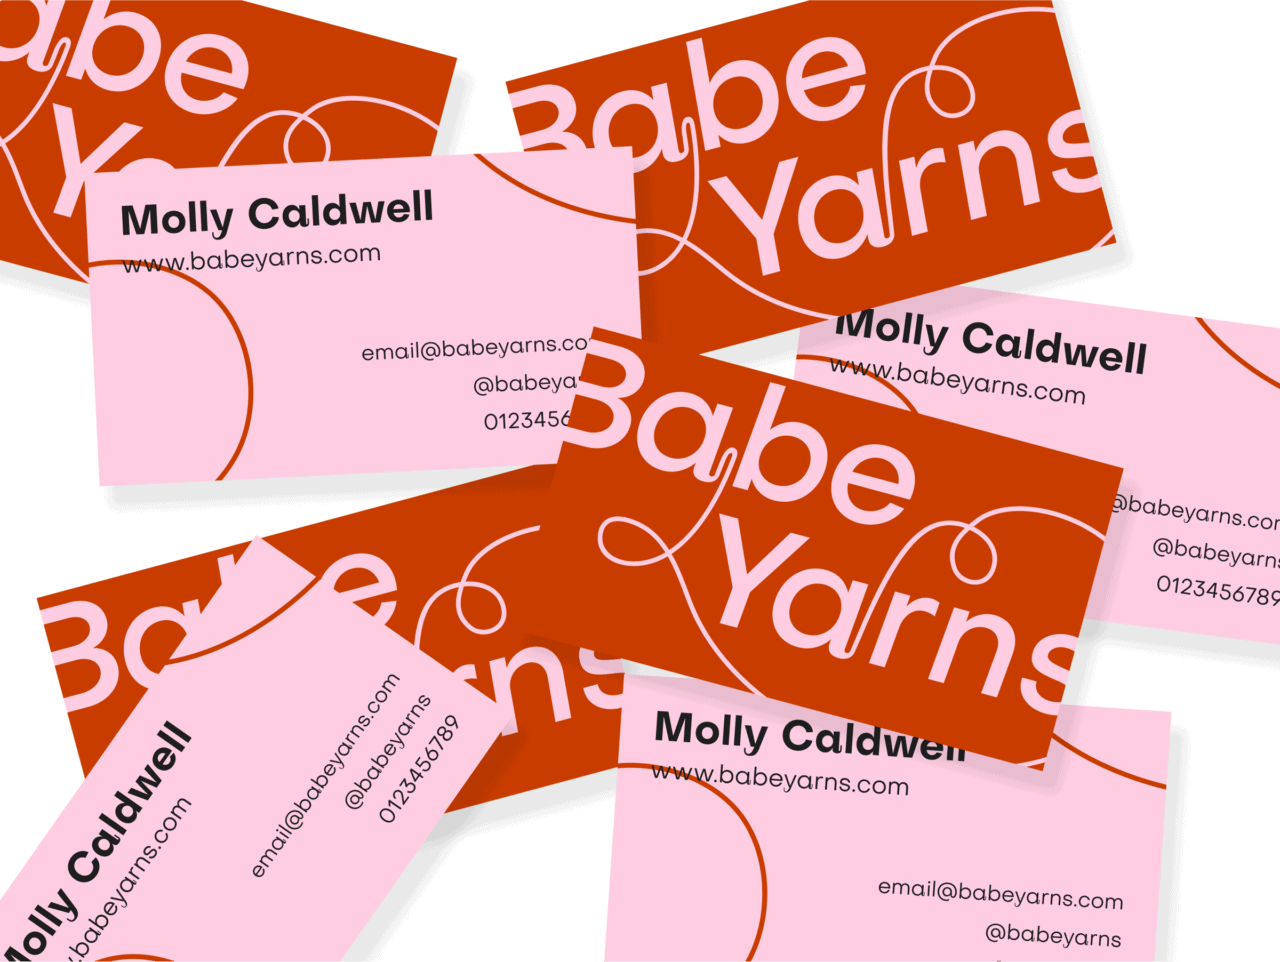 Business card examples for Babe Yarns